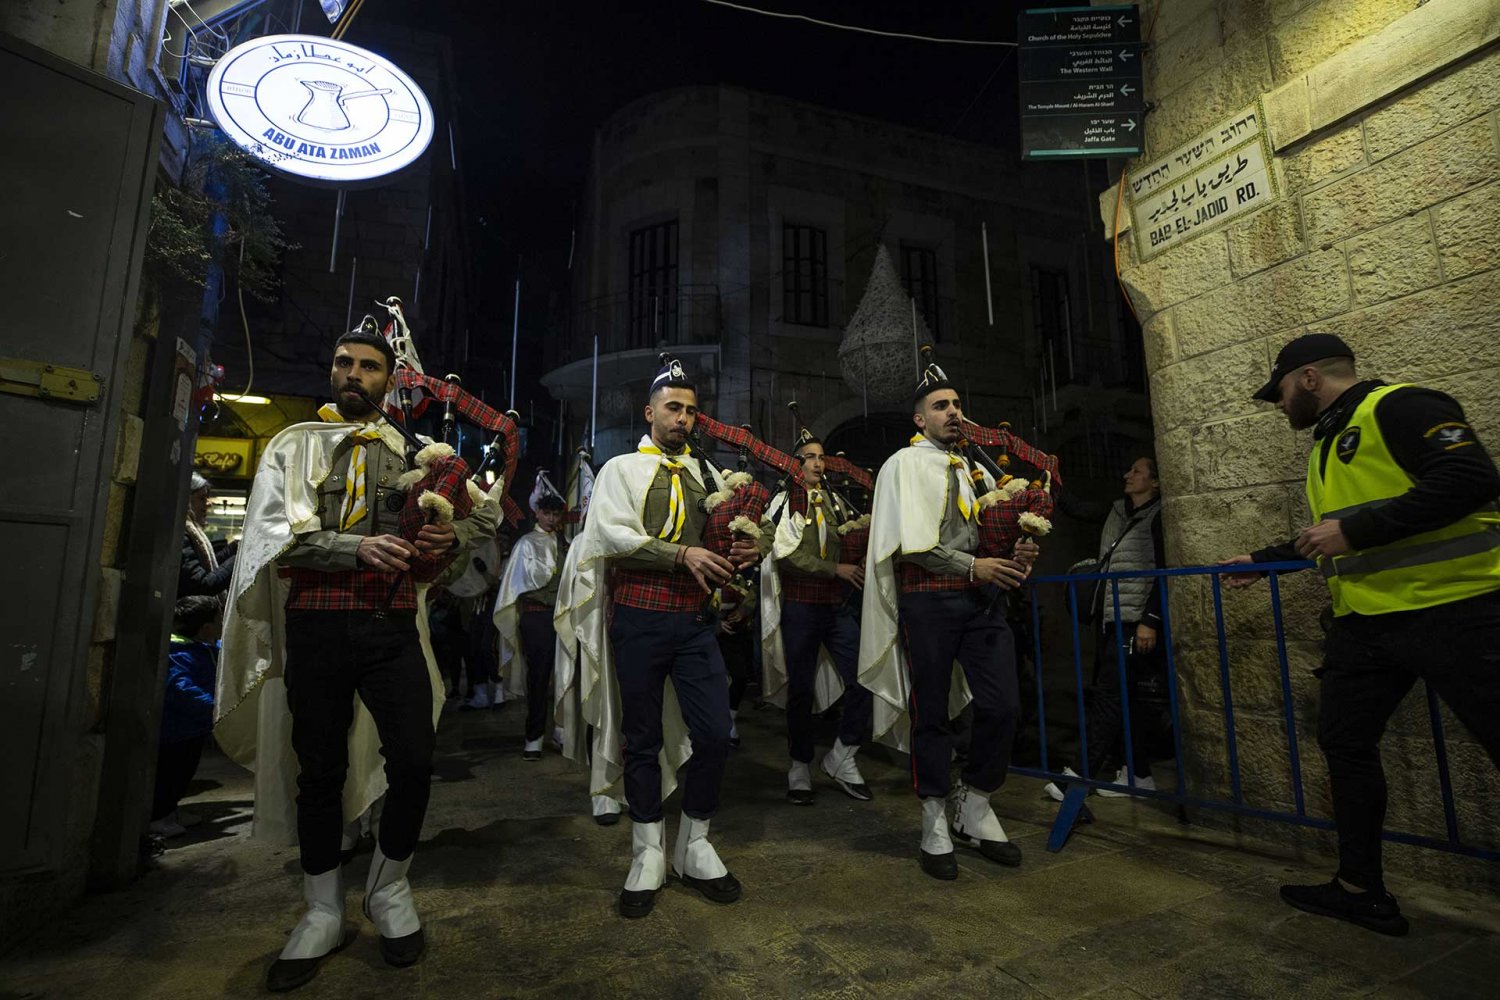 Bagpipers parade in the Old City of Jerusalem during a Christmas celebration